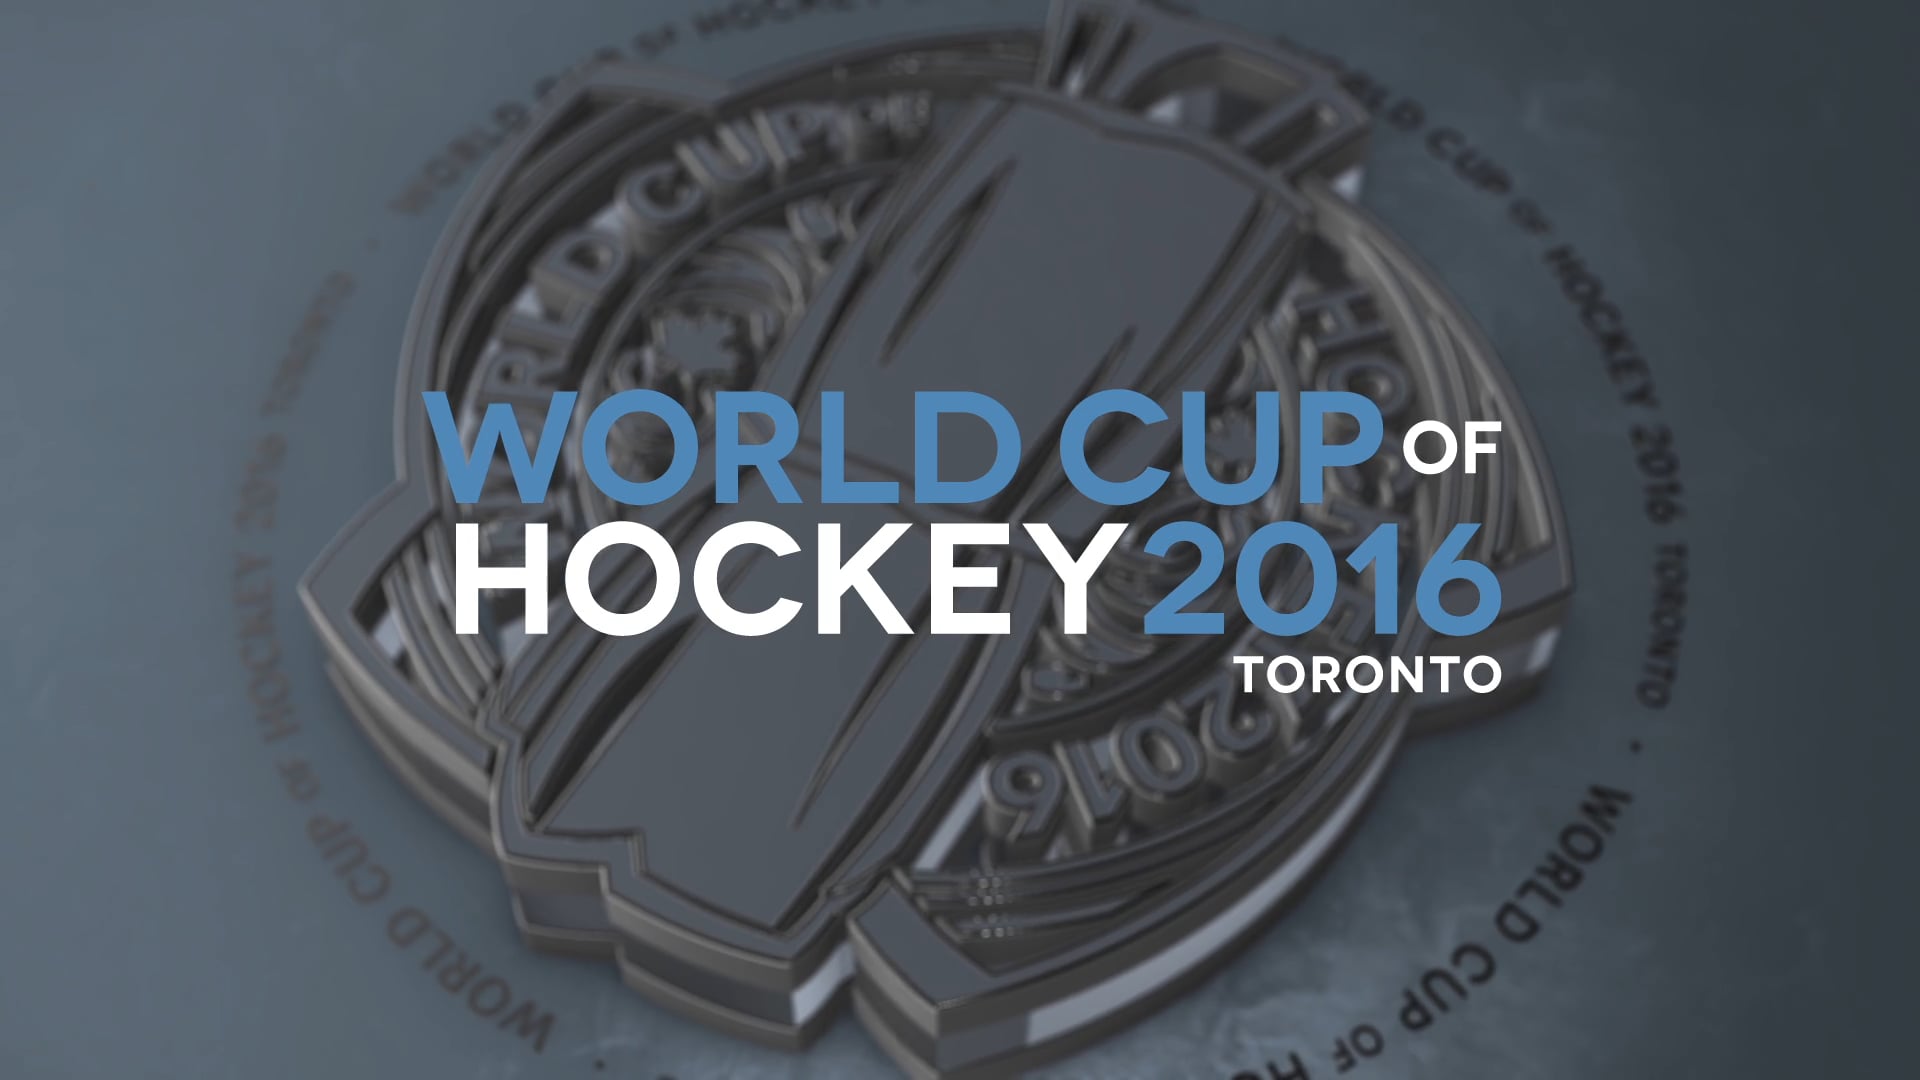 WORLD CUP OF HOCKEY SHOW PACKAGE